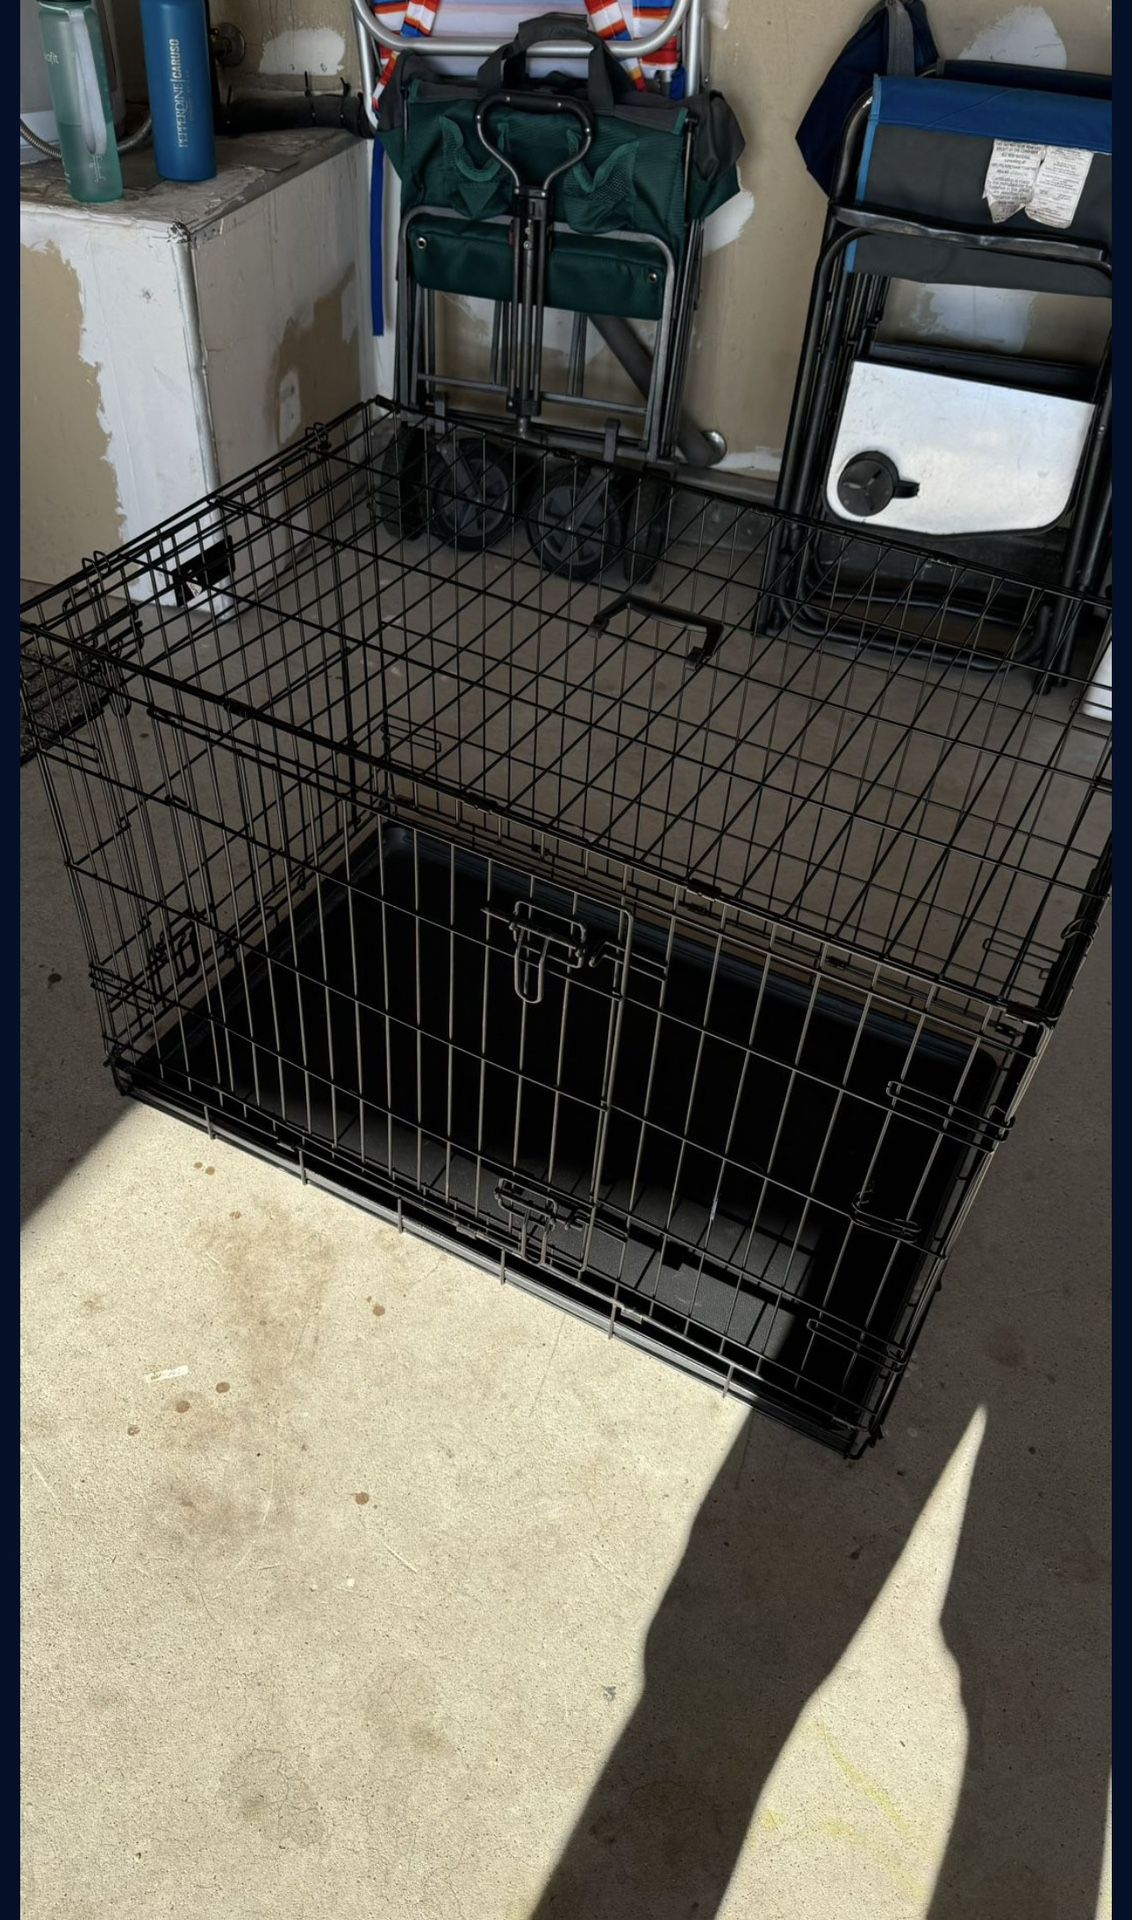 Large dog Crate